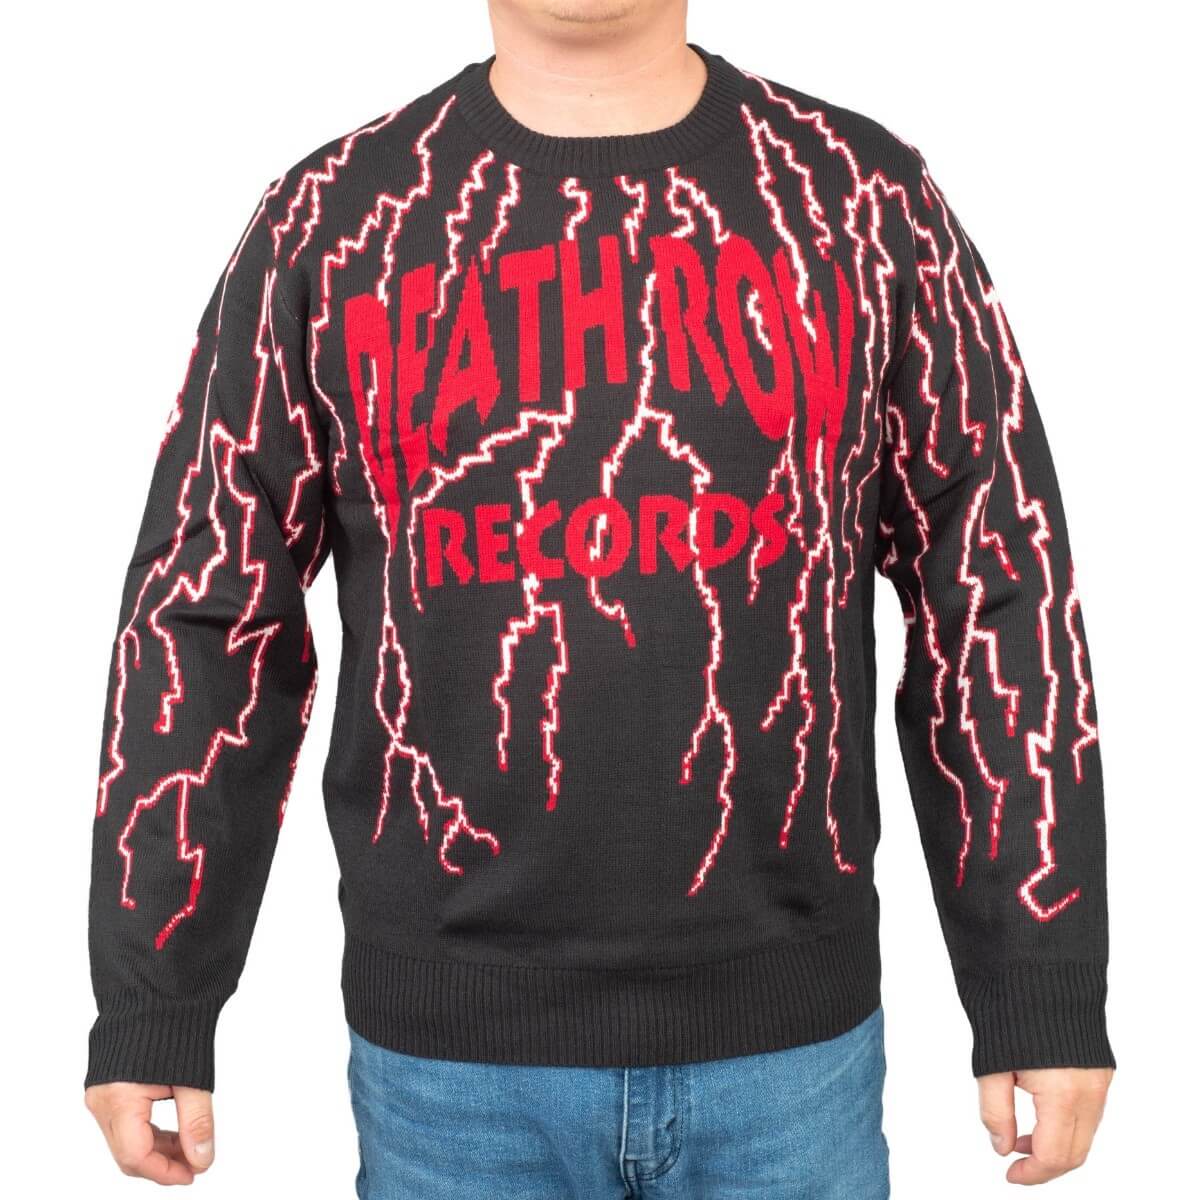 Death Row Records Lightning Ugly Christmas Sweater - Ugly Christmas ...